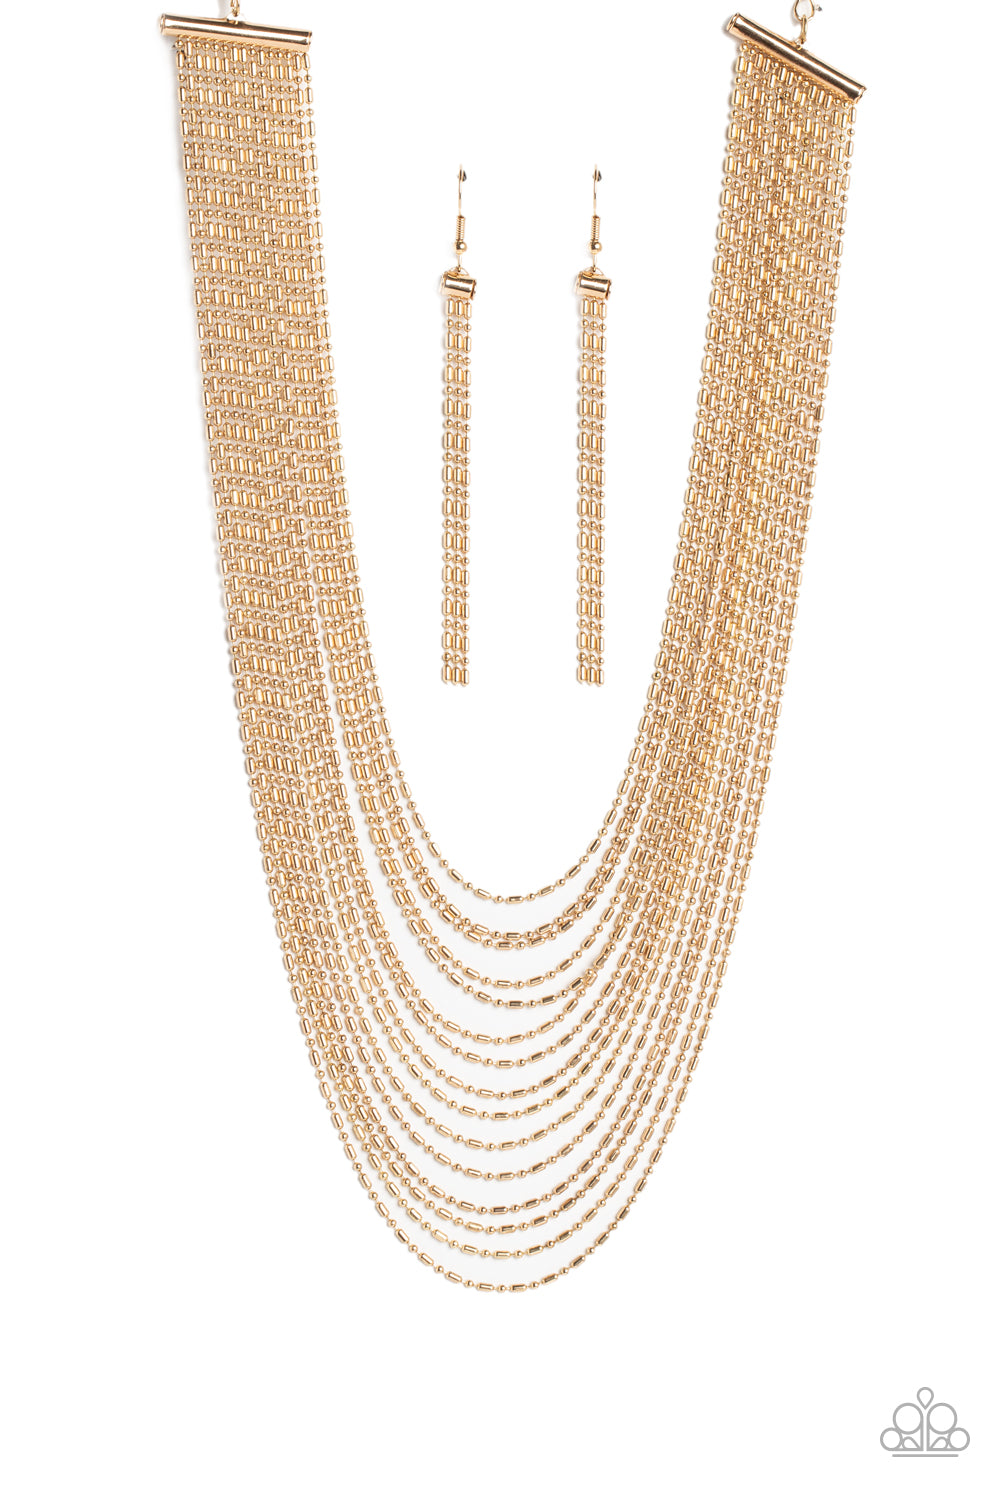 Cascading Chains - Gold Necklace